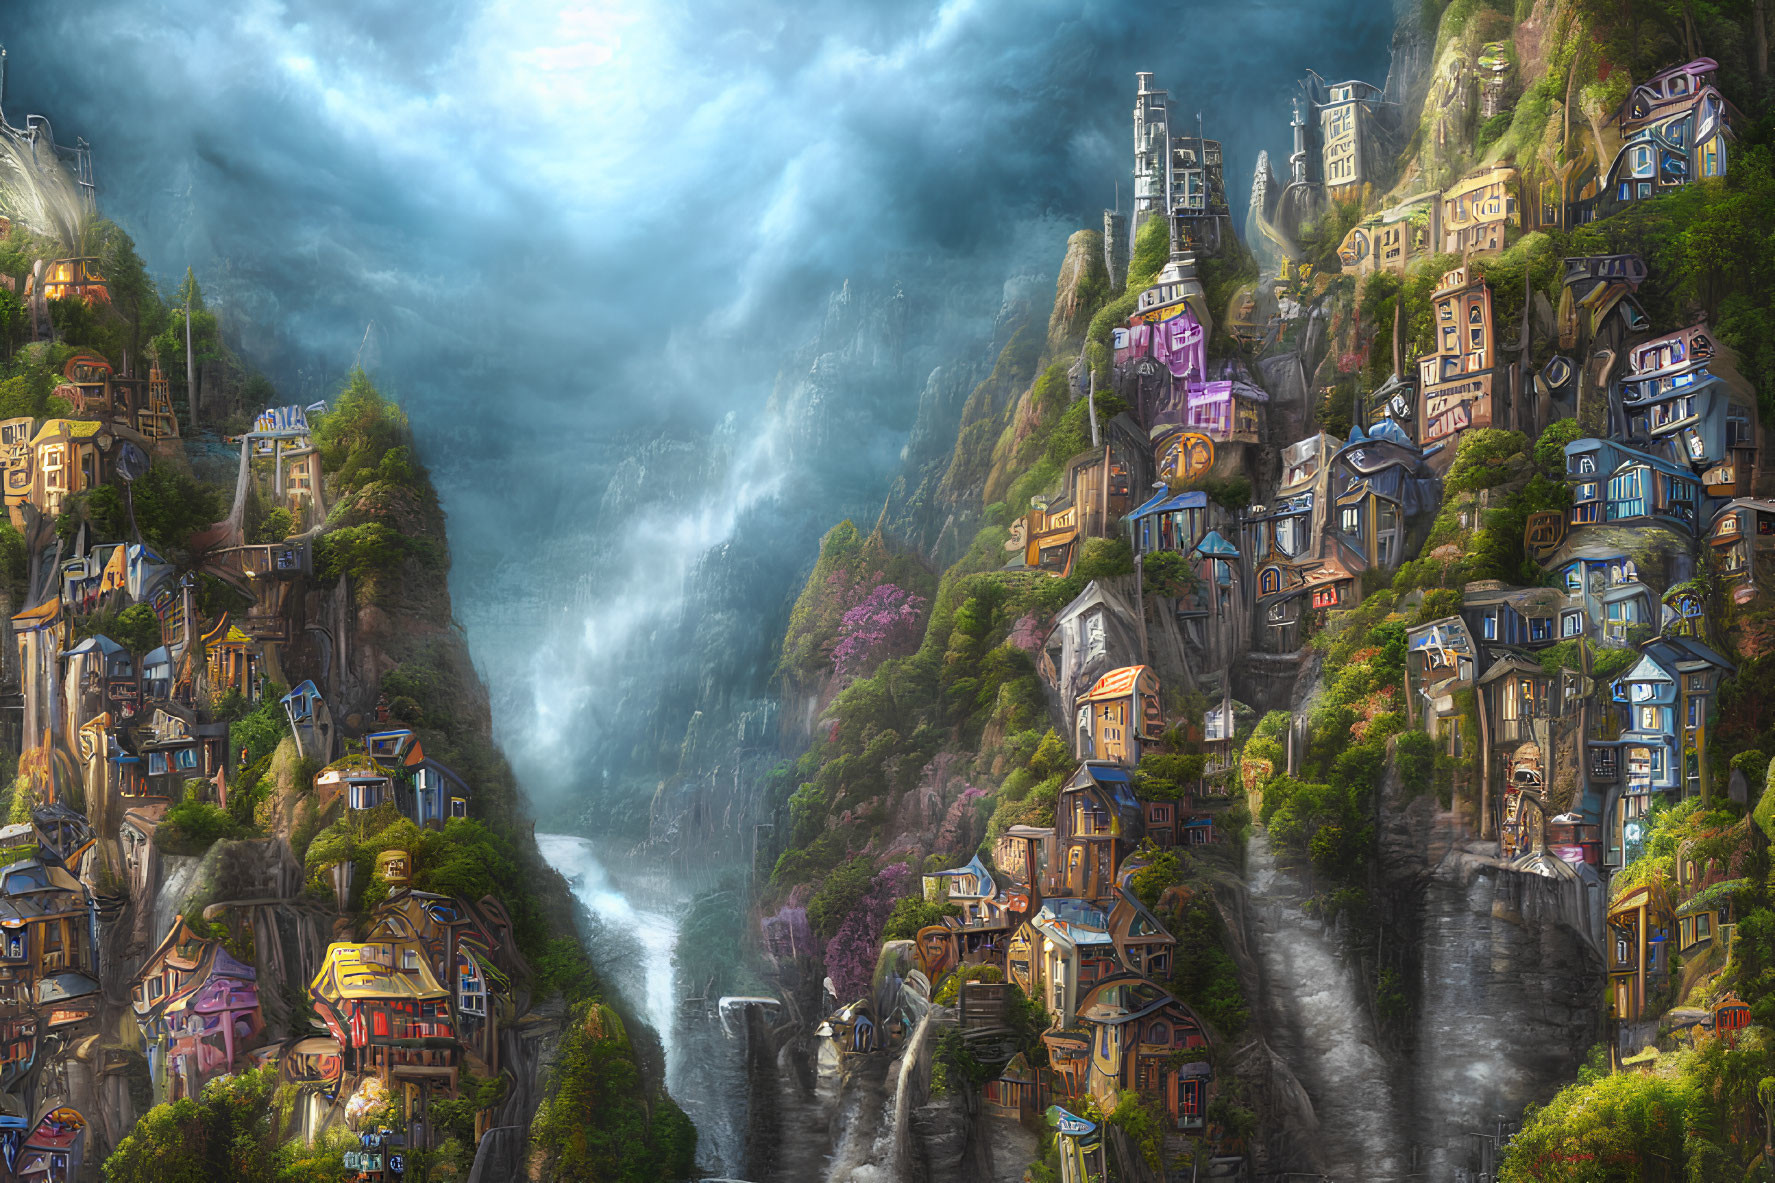 Cliffside village with waterfalls, whimsical houses & lush greenery